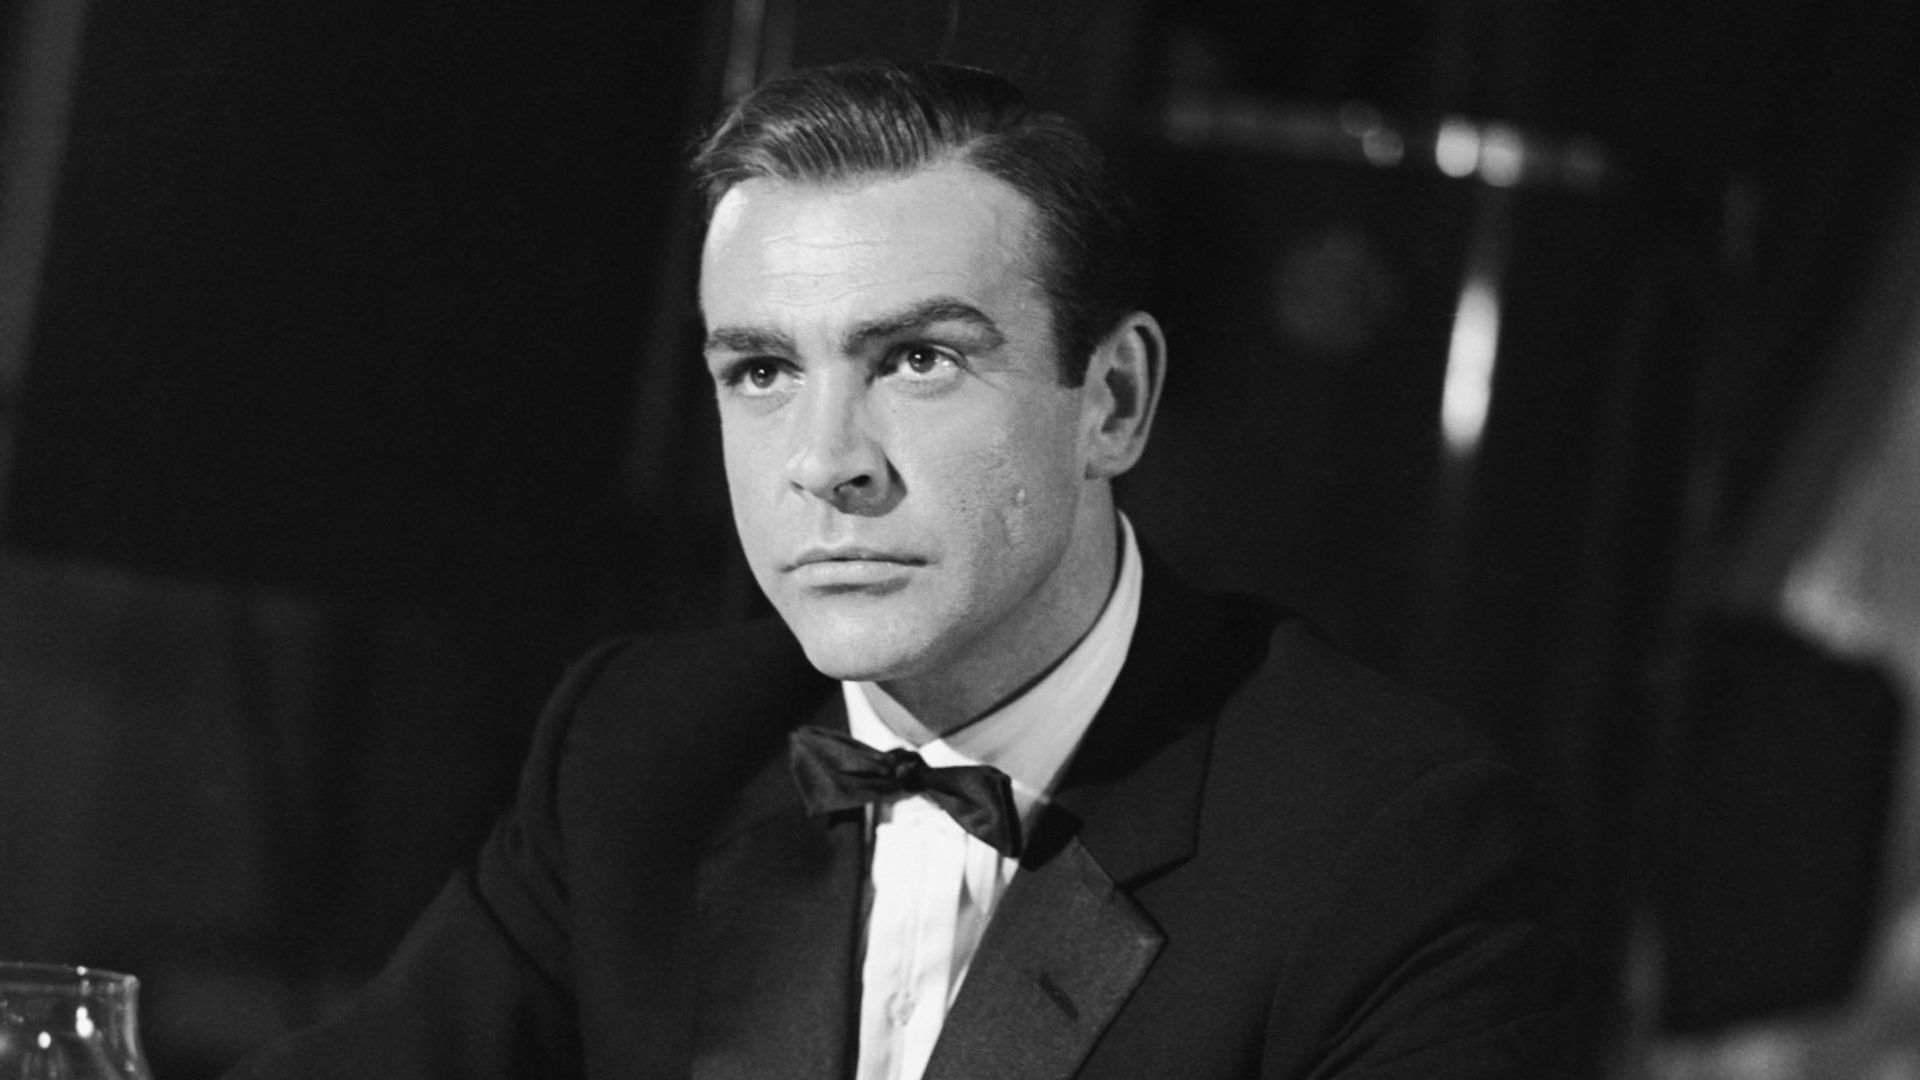 Where is Sean Connery now after retiring from acting?